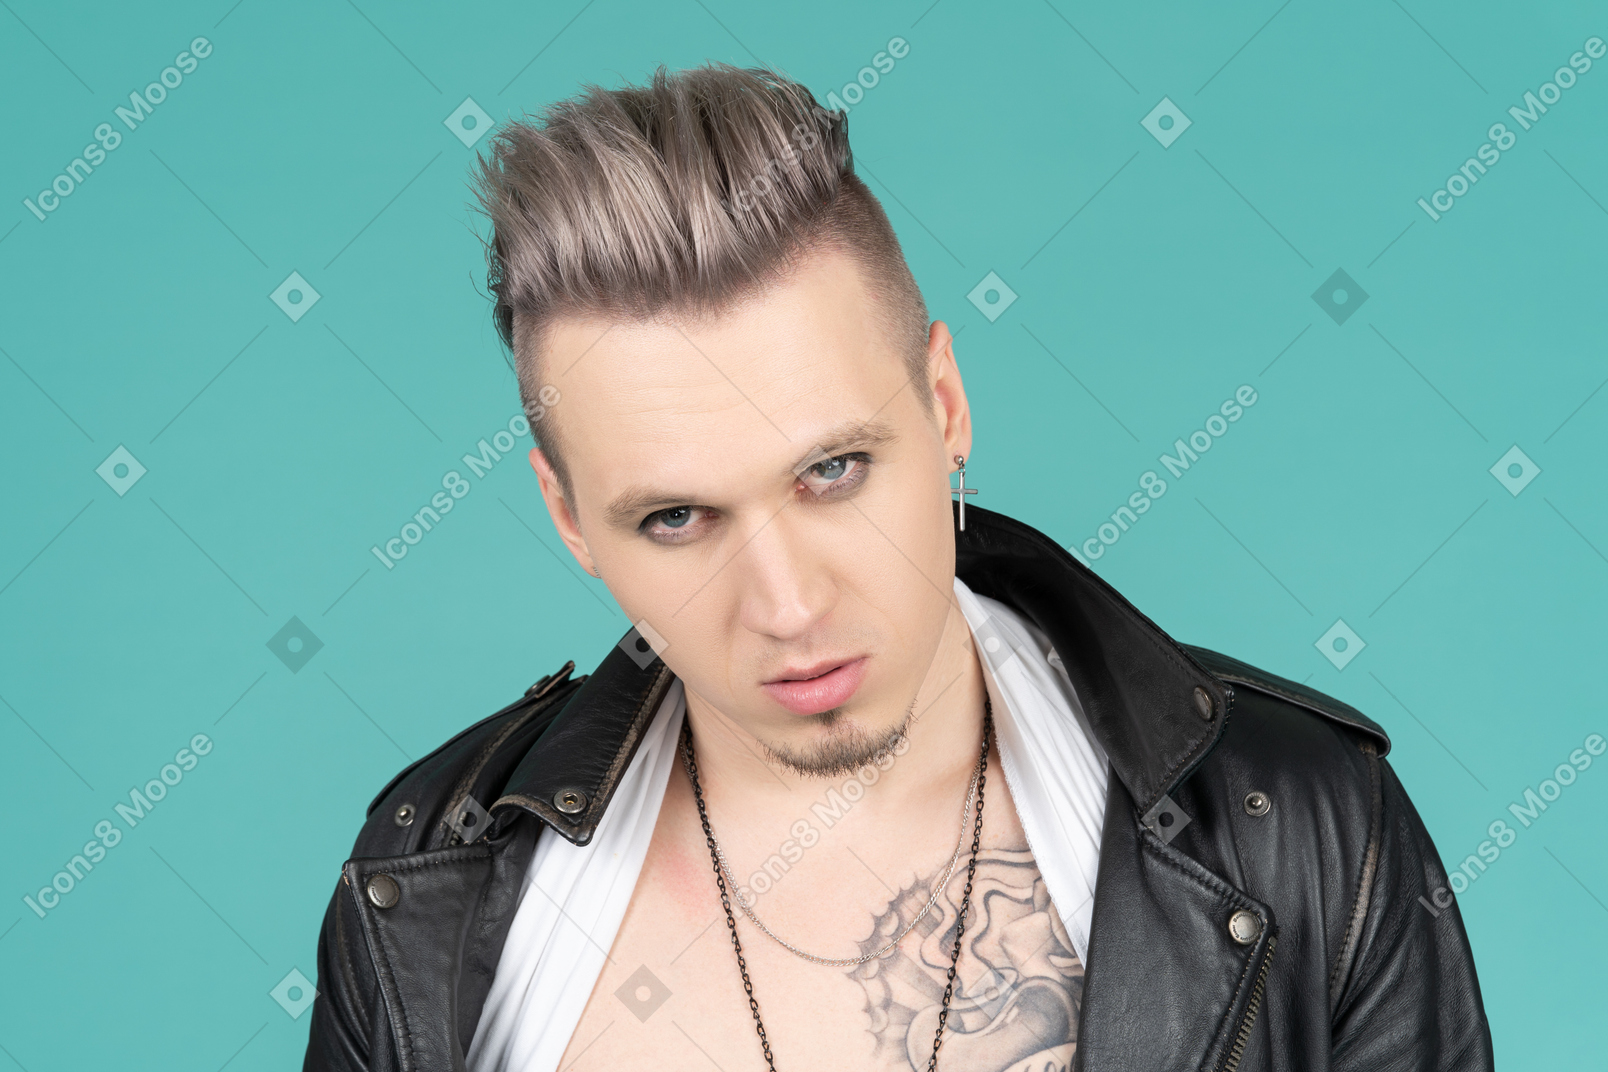 Barefaced male punk standing against camera